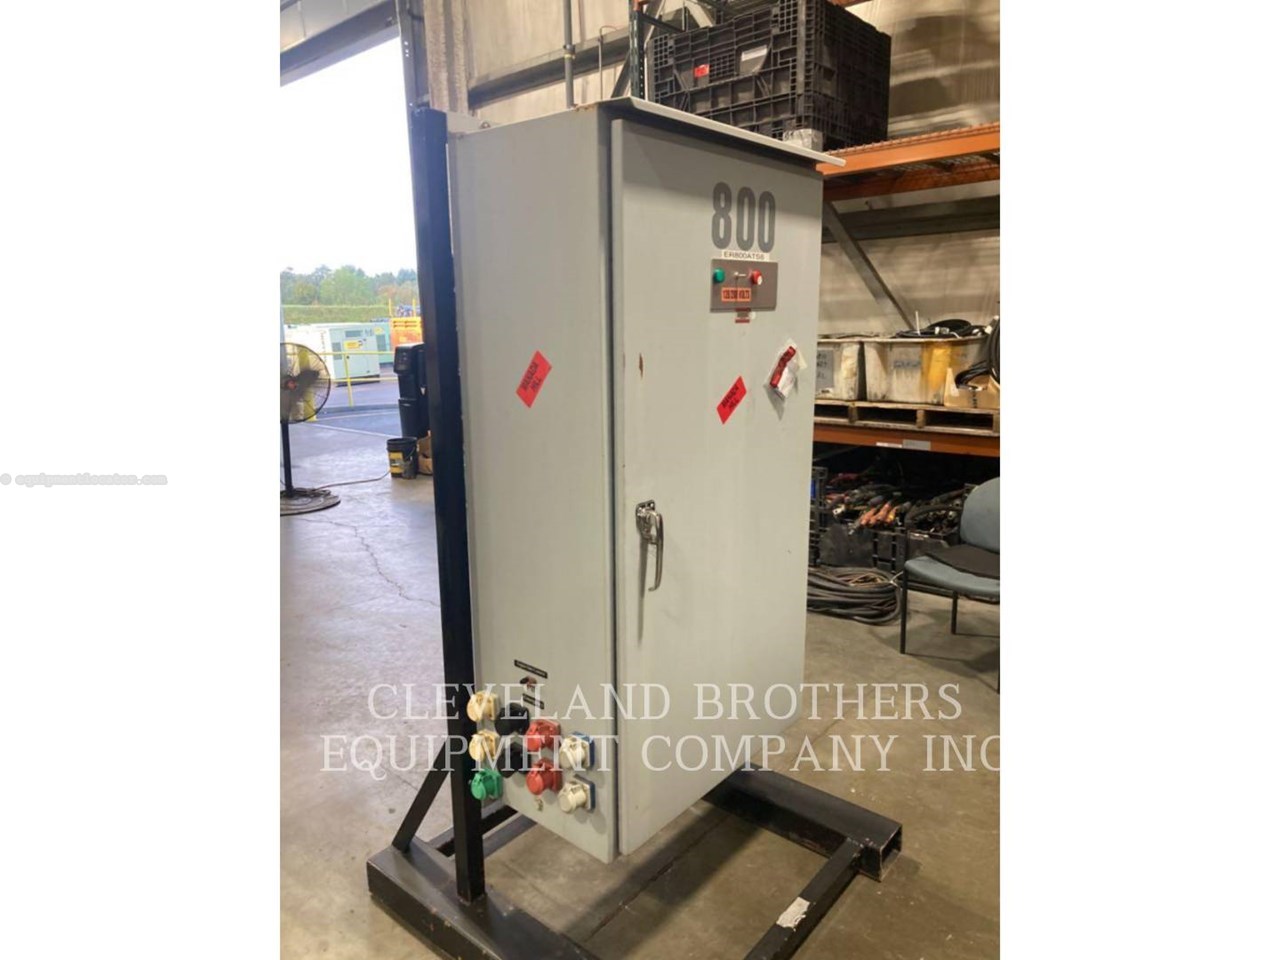 2010 Misc 800AMP TRANSFER SWITCH